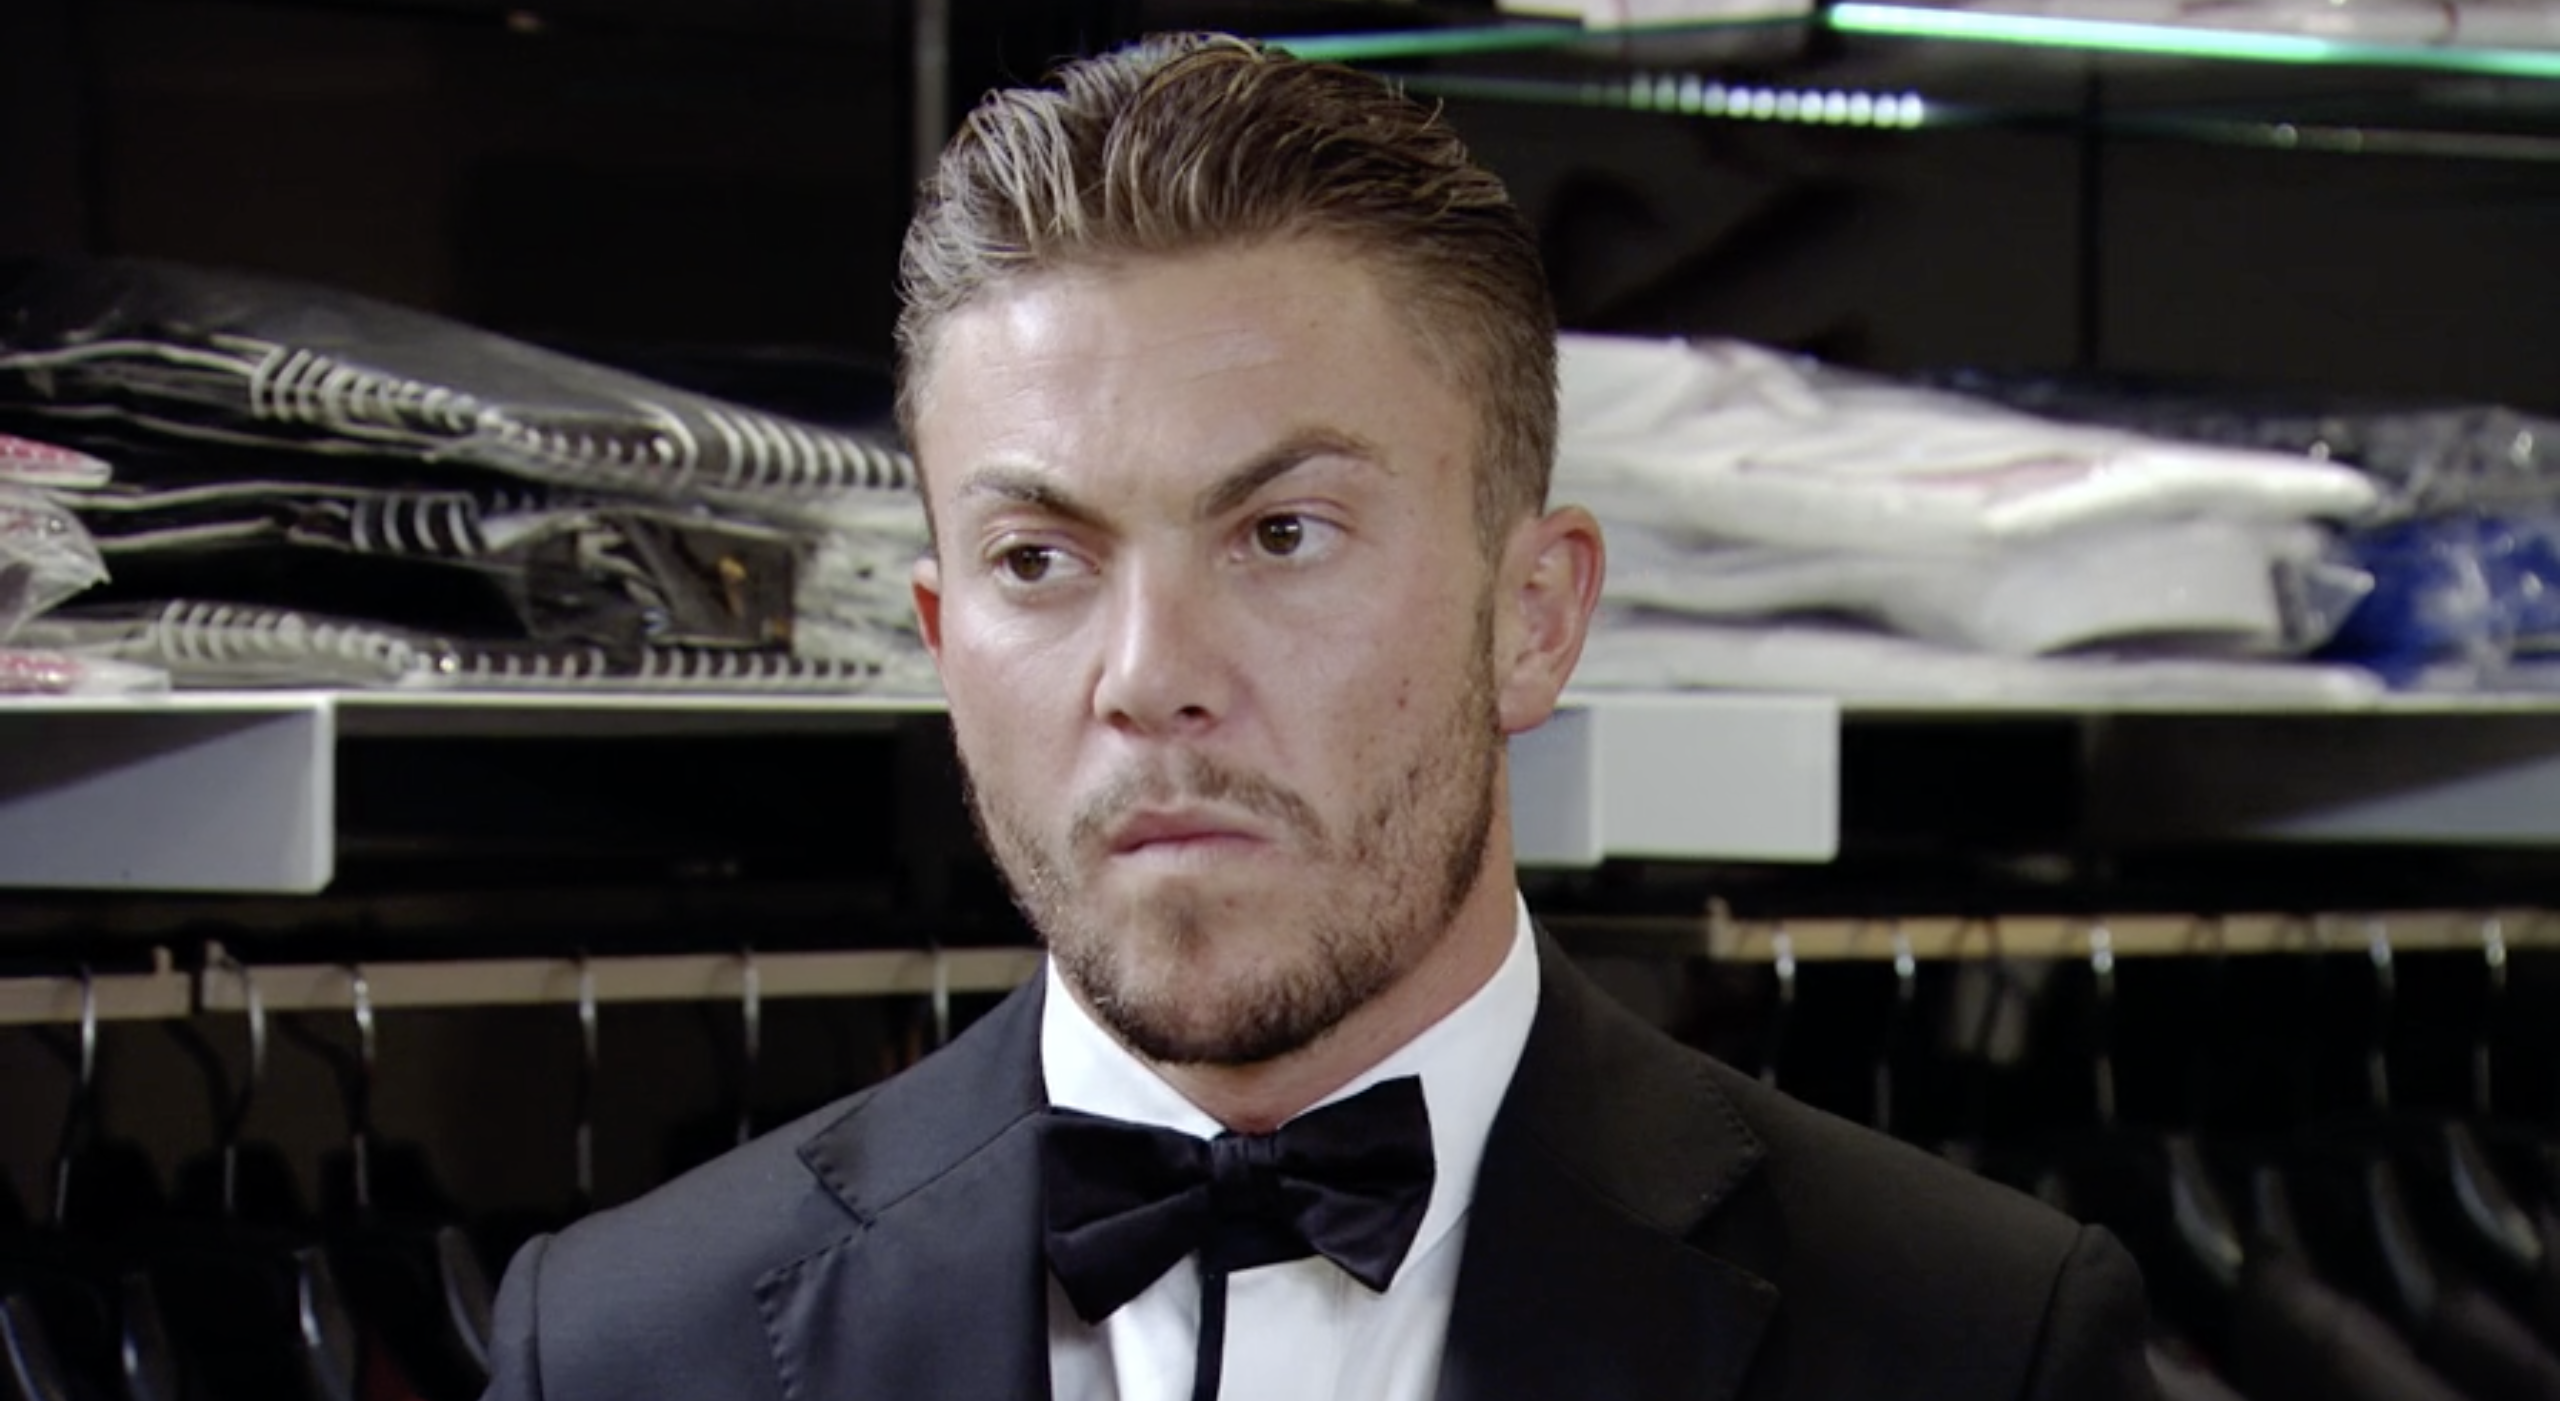 TOWIE recap – Sam and Pete ROW again: The Only Way is Essex season 23 episode 5